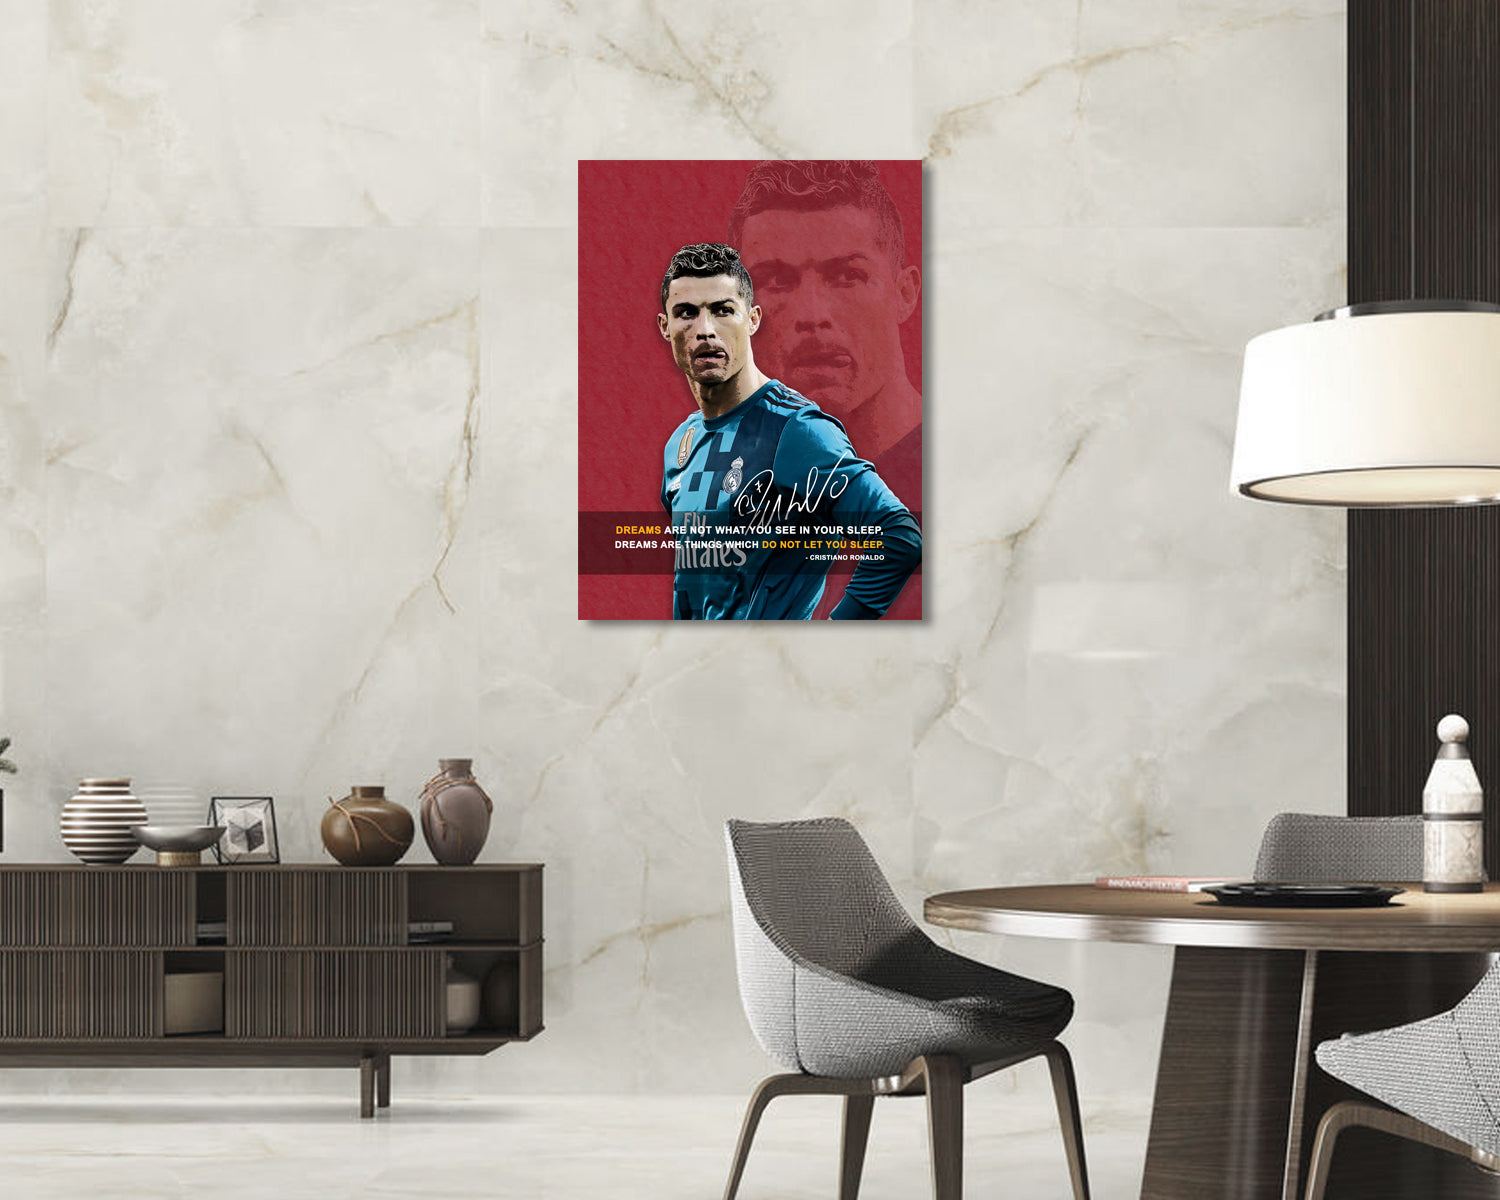 Cristiano Ronaldo Dreams are not what you see in your sleep Canvas Wall Art 